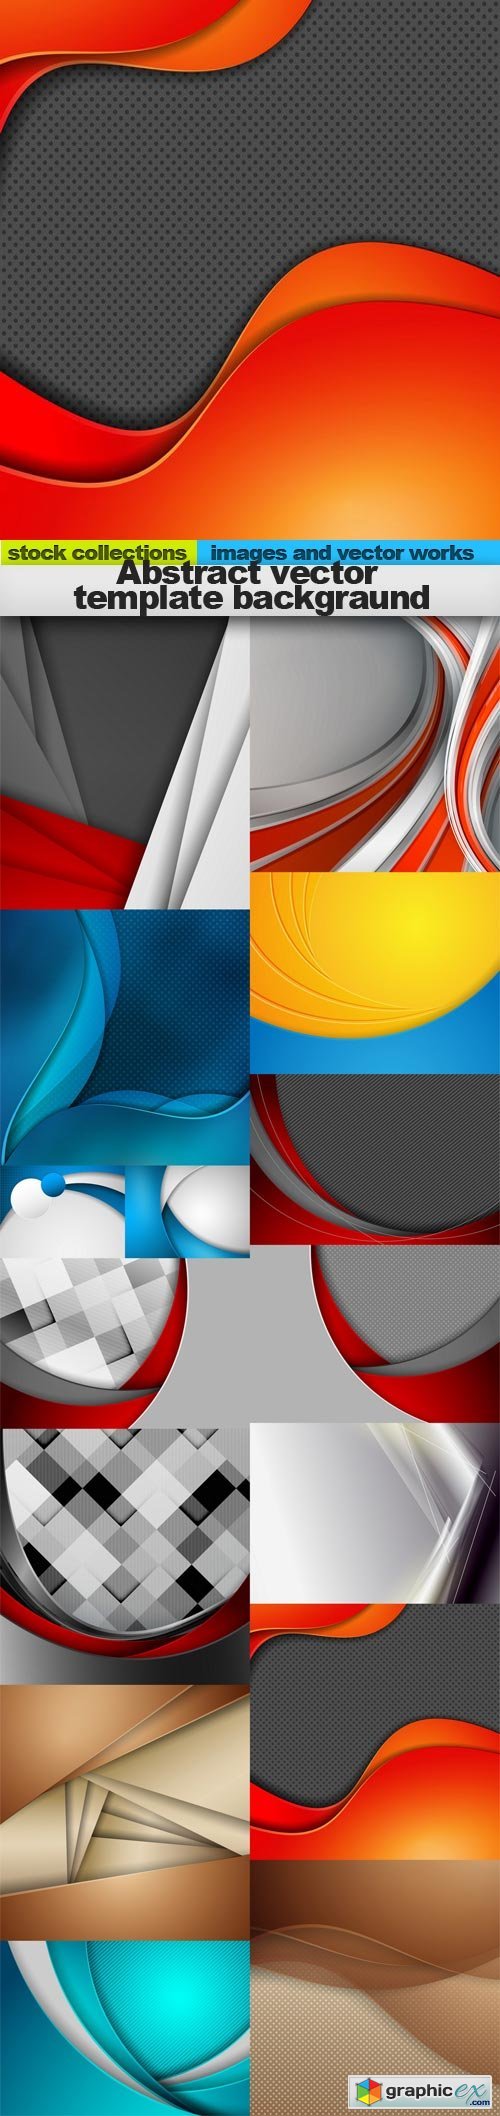 Abstract vector template backgraund, 15 x EPS